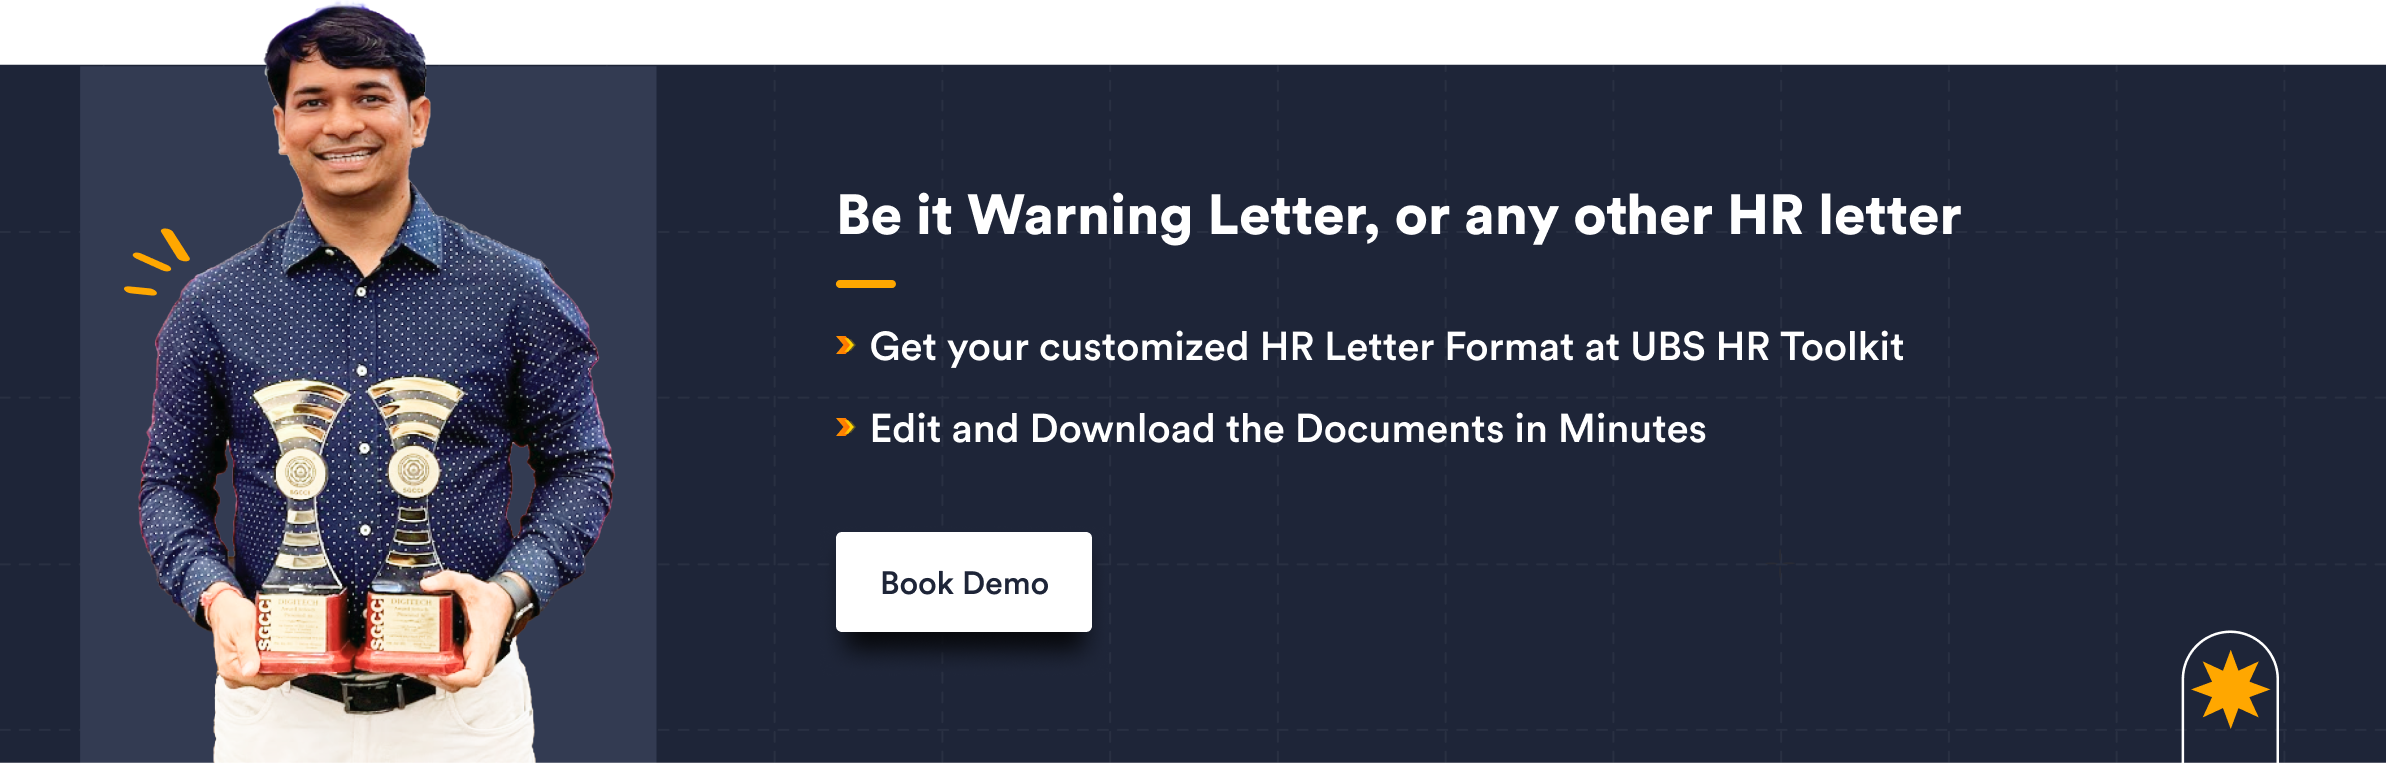 Be it Warning Letter or any other HR letter